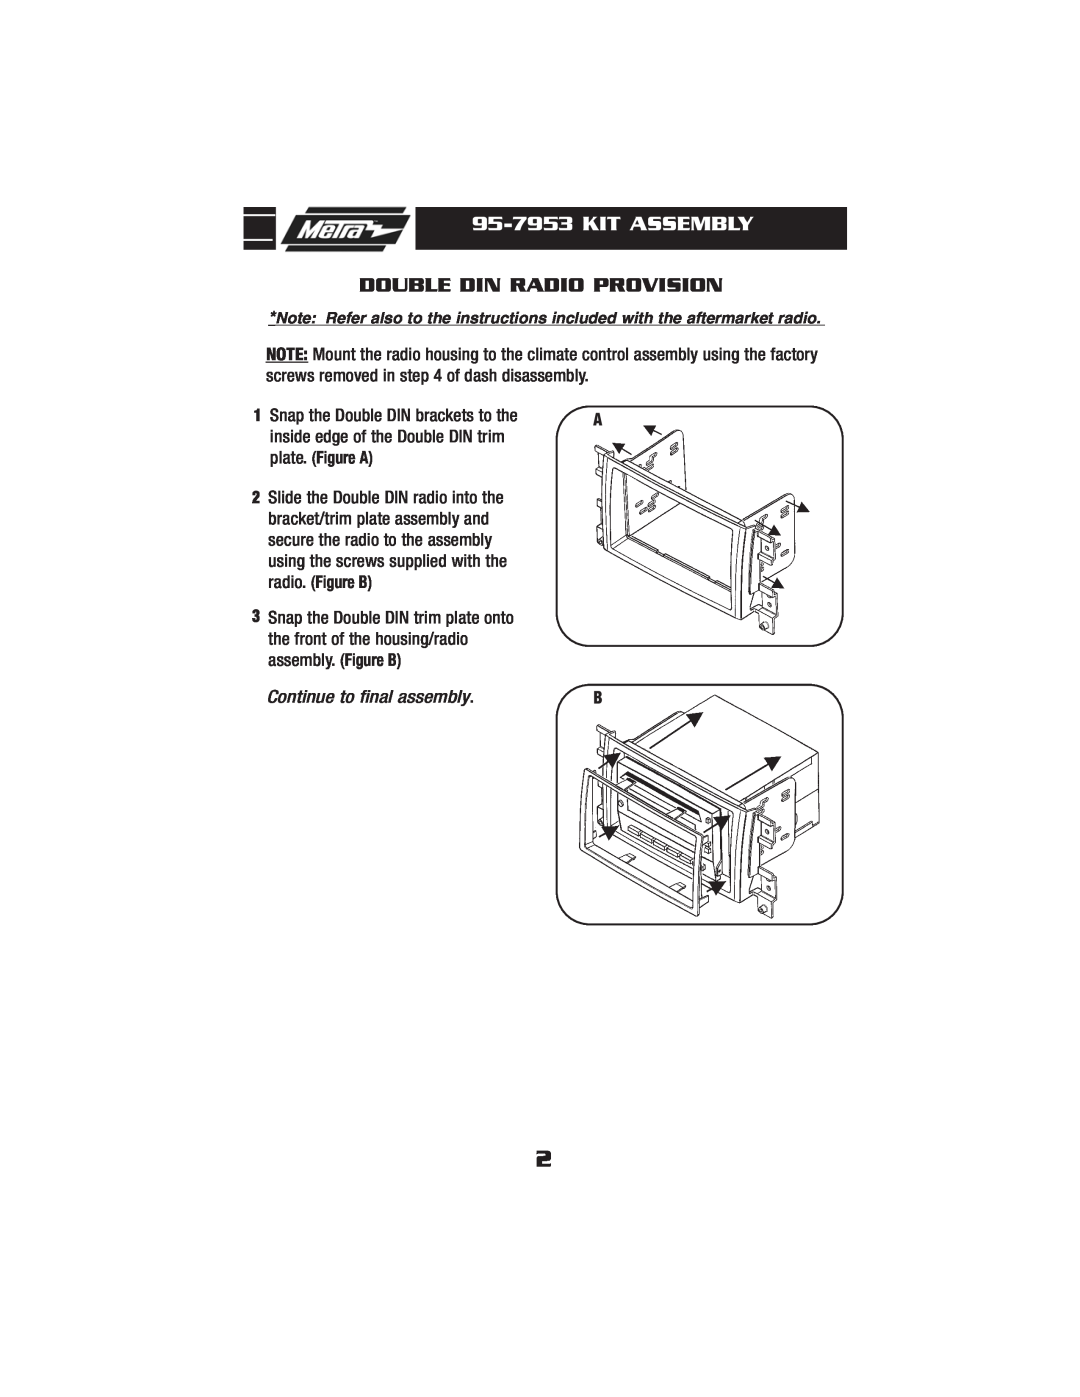 Metra Electronics 95-7953 installation instructions Kit Assembly, Double Din Radio Provision, Continue to final assembly 